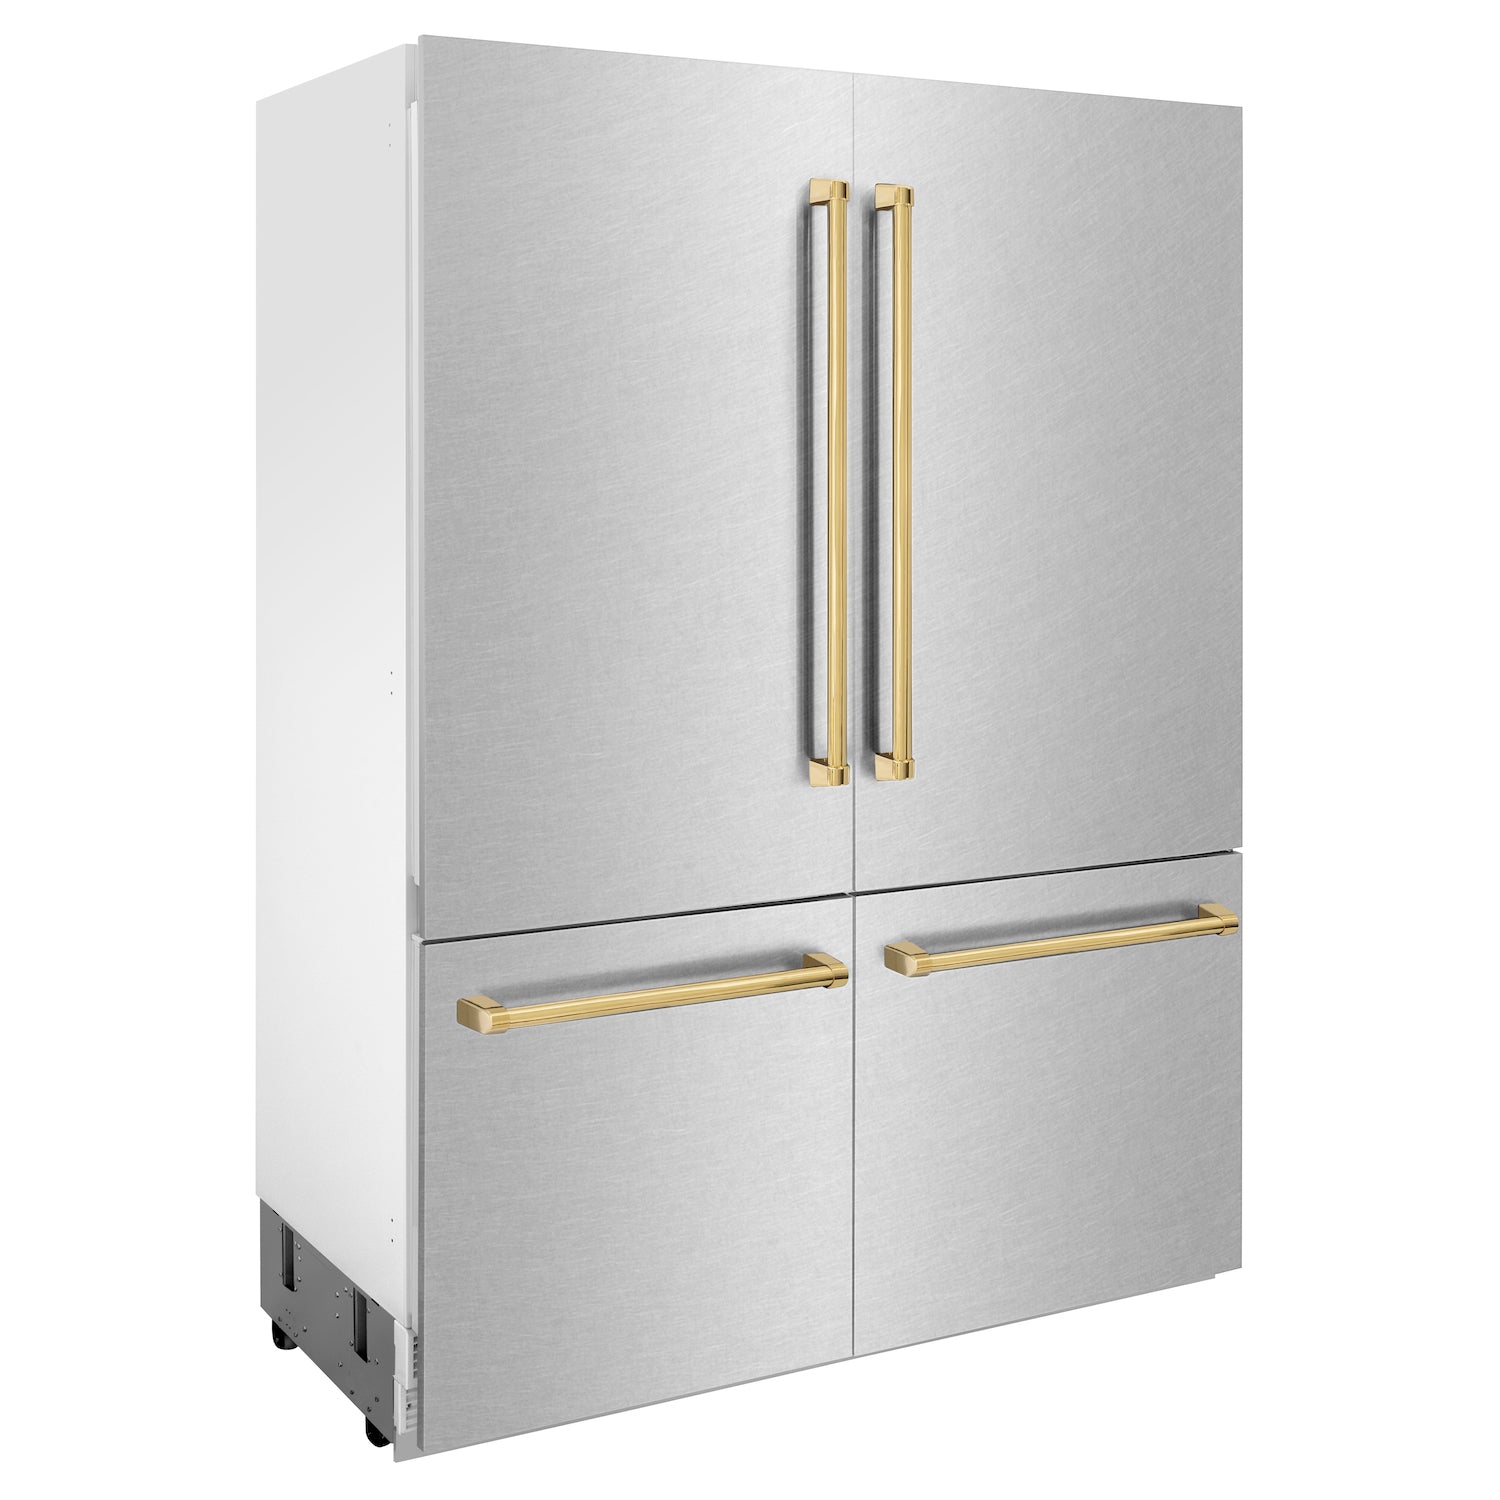 ZLINE Autograph Edition 60 in. 32.2 cu. ft. Built-in 4-Door French Door Refrigerator with Internal Water and Ice Dispenser in Fingerprint Resistant Stainless Steel with Polished Gold Accents (RBIVZ-SN-60-G) side, closed.